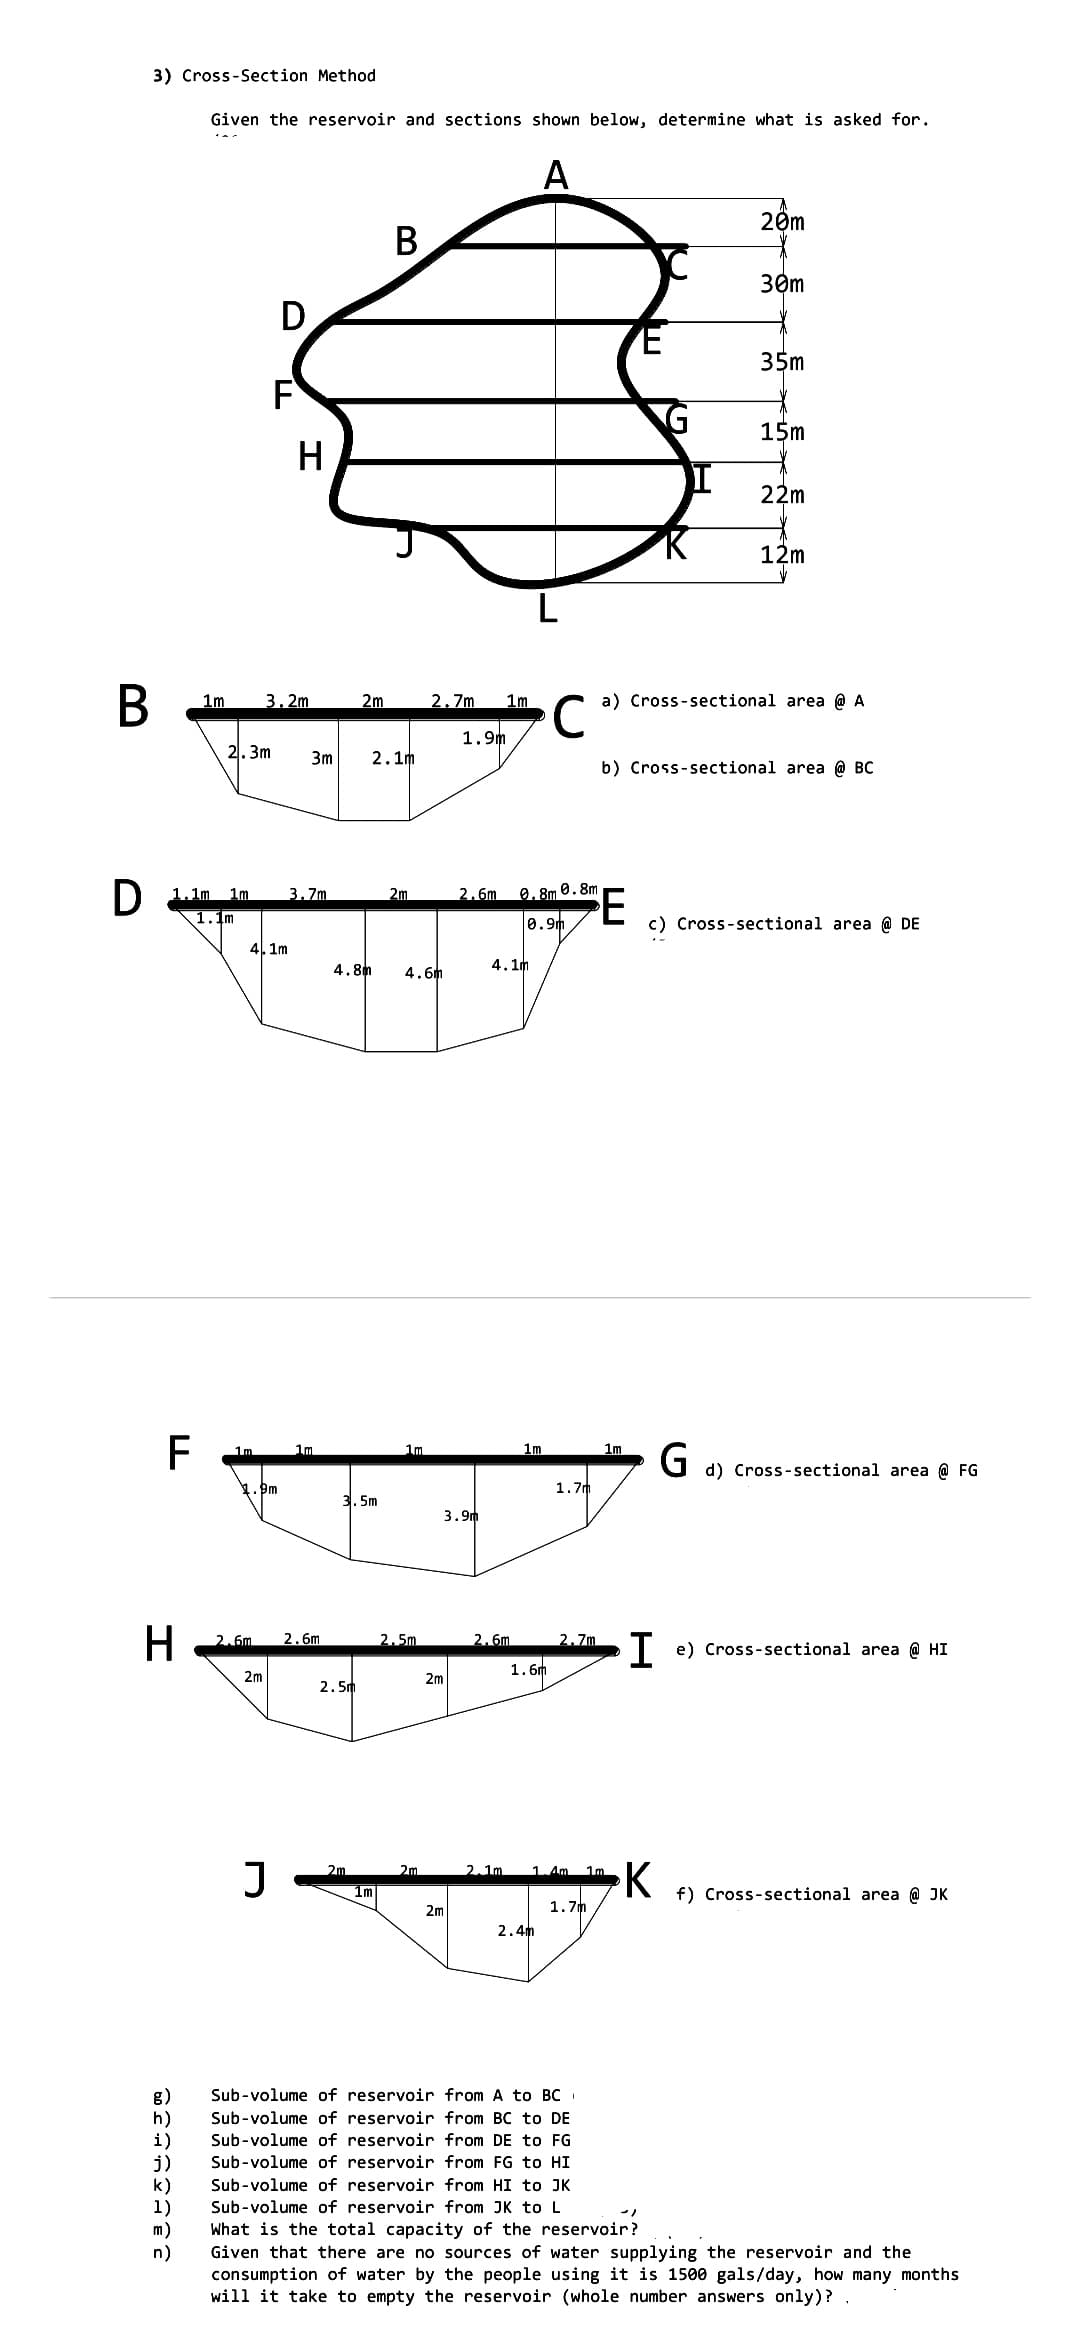 3) Cross-Section Method
Given the reservoir and sections shown below, determine what is asked for.
A
20m
В
30m
D.
35m
F
15m
H
22m
12m
В
1m
3. 2m
2m
2.7m
1m
a) Cross-sectional area @ A
1.9m
2.3m
3m
2. 1m
b) Cross-sectional area @ BC
D 1.1m 1m
1.1m
3.7m
2m
2.6m
0. 8m 0. 8m
0.9m
c) Cross-sectional area @ DE
4. 1m
4.8h
4. 6m
4. 1m
F
Im
1m
1m
1m
d) Cross-sectional area @ FG
1. Đm
1.7m
3. 5m
3.9m
H
2.6m
2.6m
2.5m
2.6m
2.7m
e) Cross-sectional area @ HI
1.6m
2m
2m
2. 5m
K
2m
2m
2.1m.
1.4m
1m
1m
f) Cross-sectional area @ JK
2m
1.7m
2. 4m
Sub-volume of reservoir from A to BC
Sub-volume of reservoir from BC to DE
h)
i)
j)
k)
1)
m)
n)
Sub-volume of reservoir from DE to FG
Sub-volume of reservoir from FG to HI
Sub-volume of reservoir from HI to JK
Sub-volume of reservoir from JK to L
What is the total capacity of the reservoir?
Given that there are no sources of water supplying the reservoir and the
consumption of water by the people using it is 1500 gals/day, how many months
will it take to empty the reservoir (whole number answers only)?
